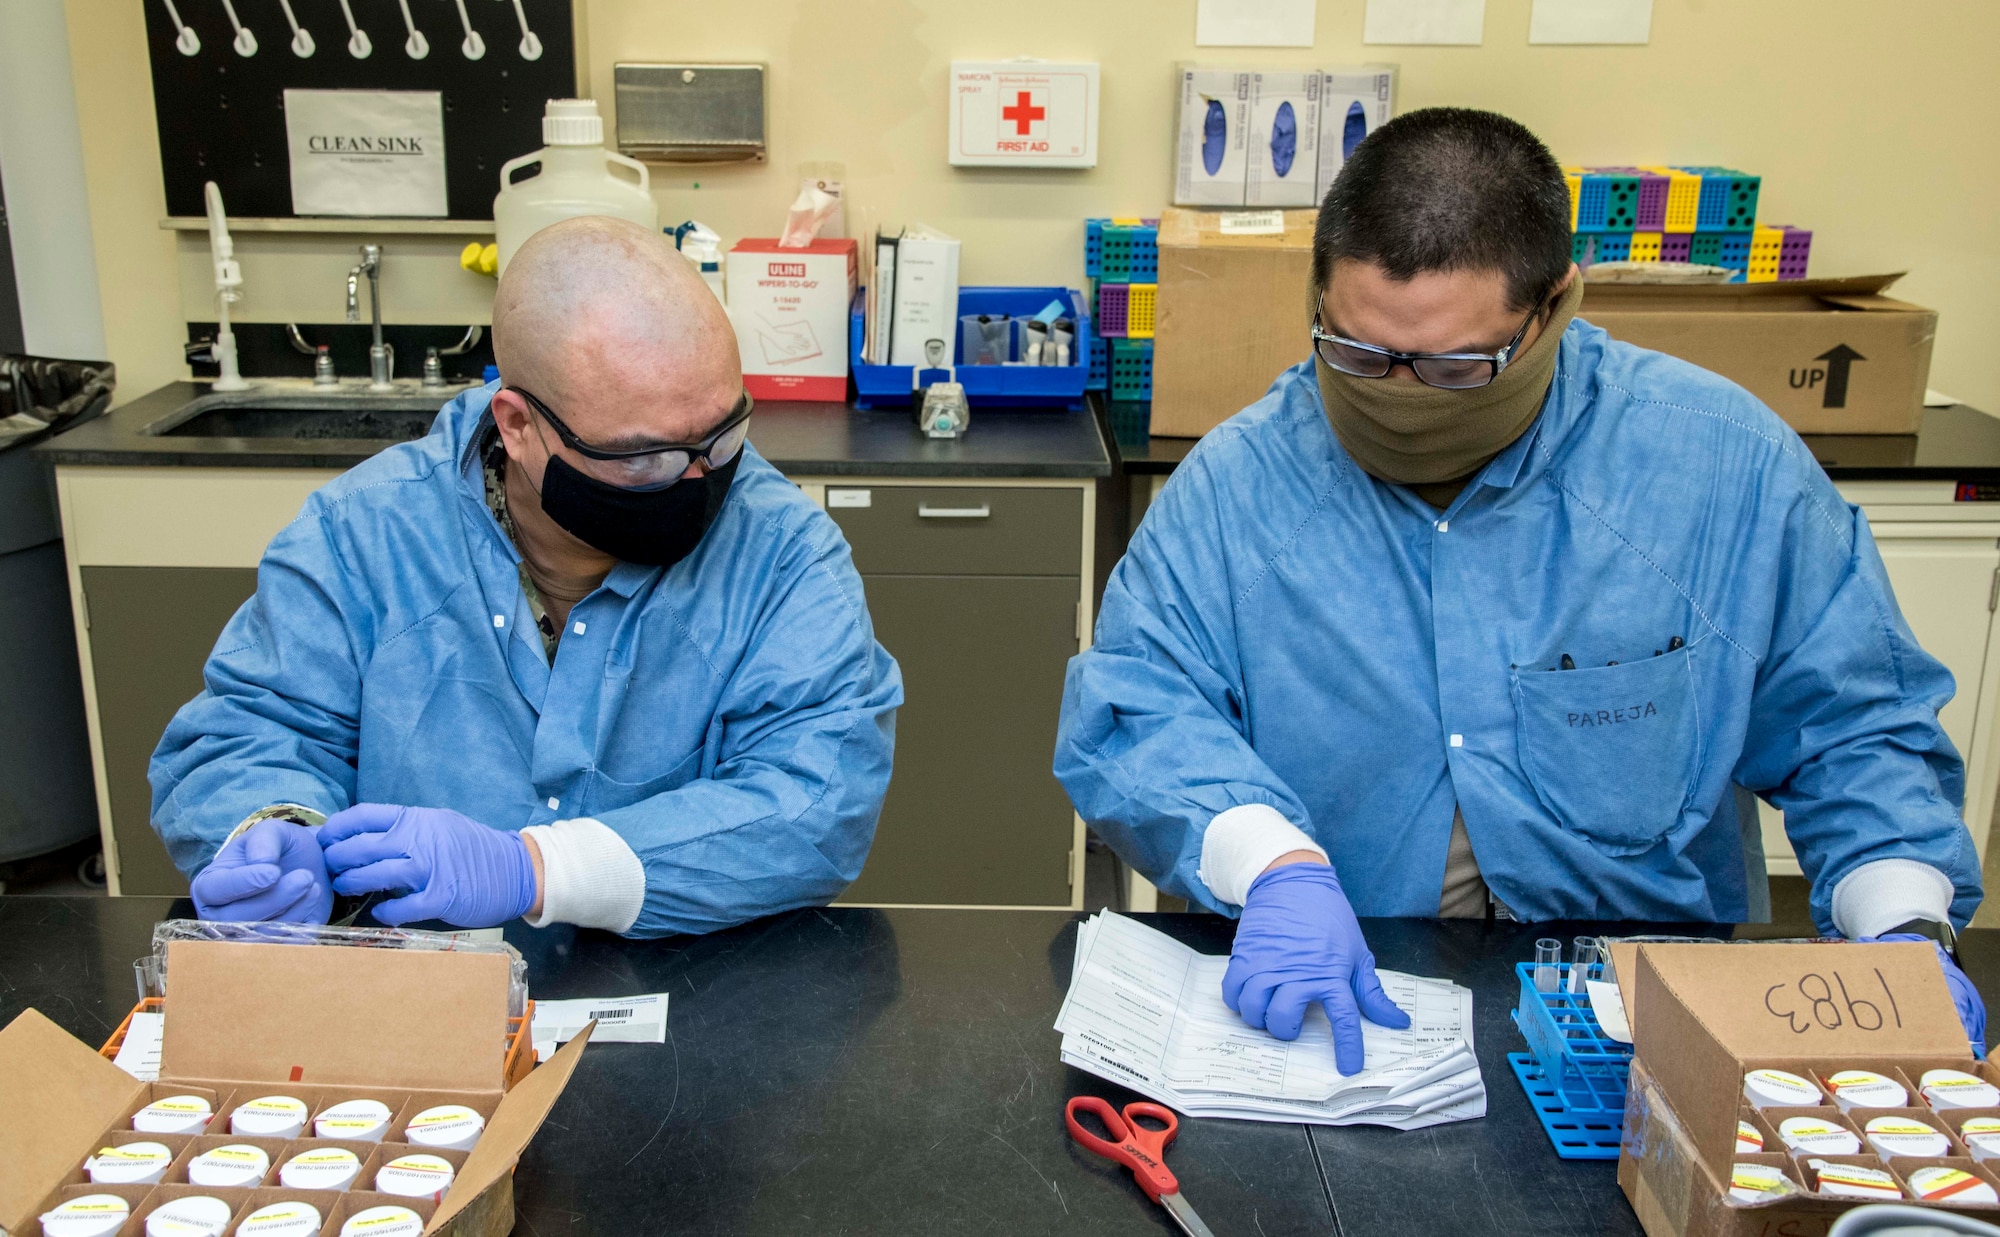 Navy Petty Officer 1st Class Edinmel Balterocruz (left) and Air Force Master Sgt. Jesson Pareja, both Armed Forces Medical Examiner System Forensic Toxicology laboratory technicians, accession samples for testing April 13, 2020. Balterocruz and Pareja and the Division of Forensic Toxicology continue to support national security and combatant commanders through timely and effective testing for the abuse of illicit drug threats. (U.S. Air Force photo by Tech. Sgt. Nicole Leidholm)